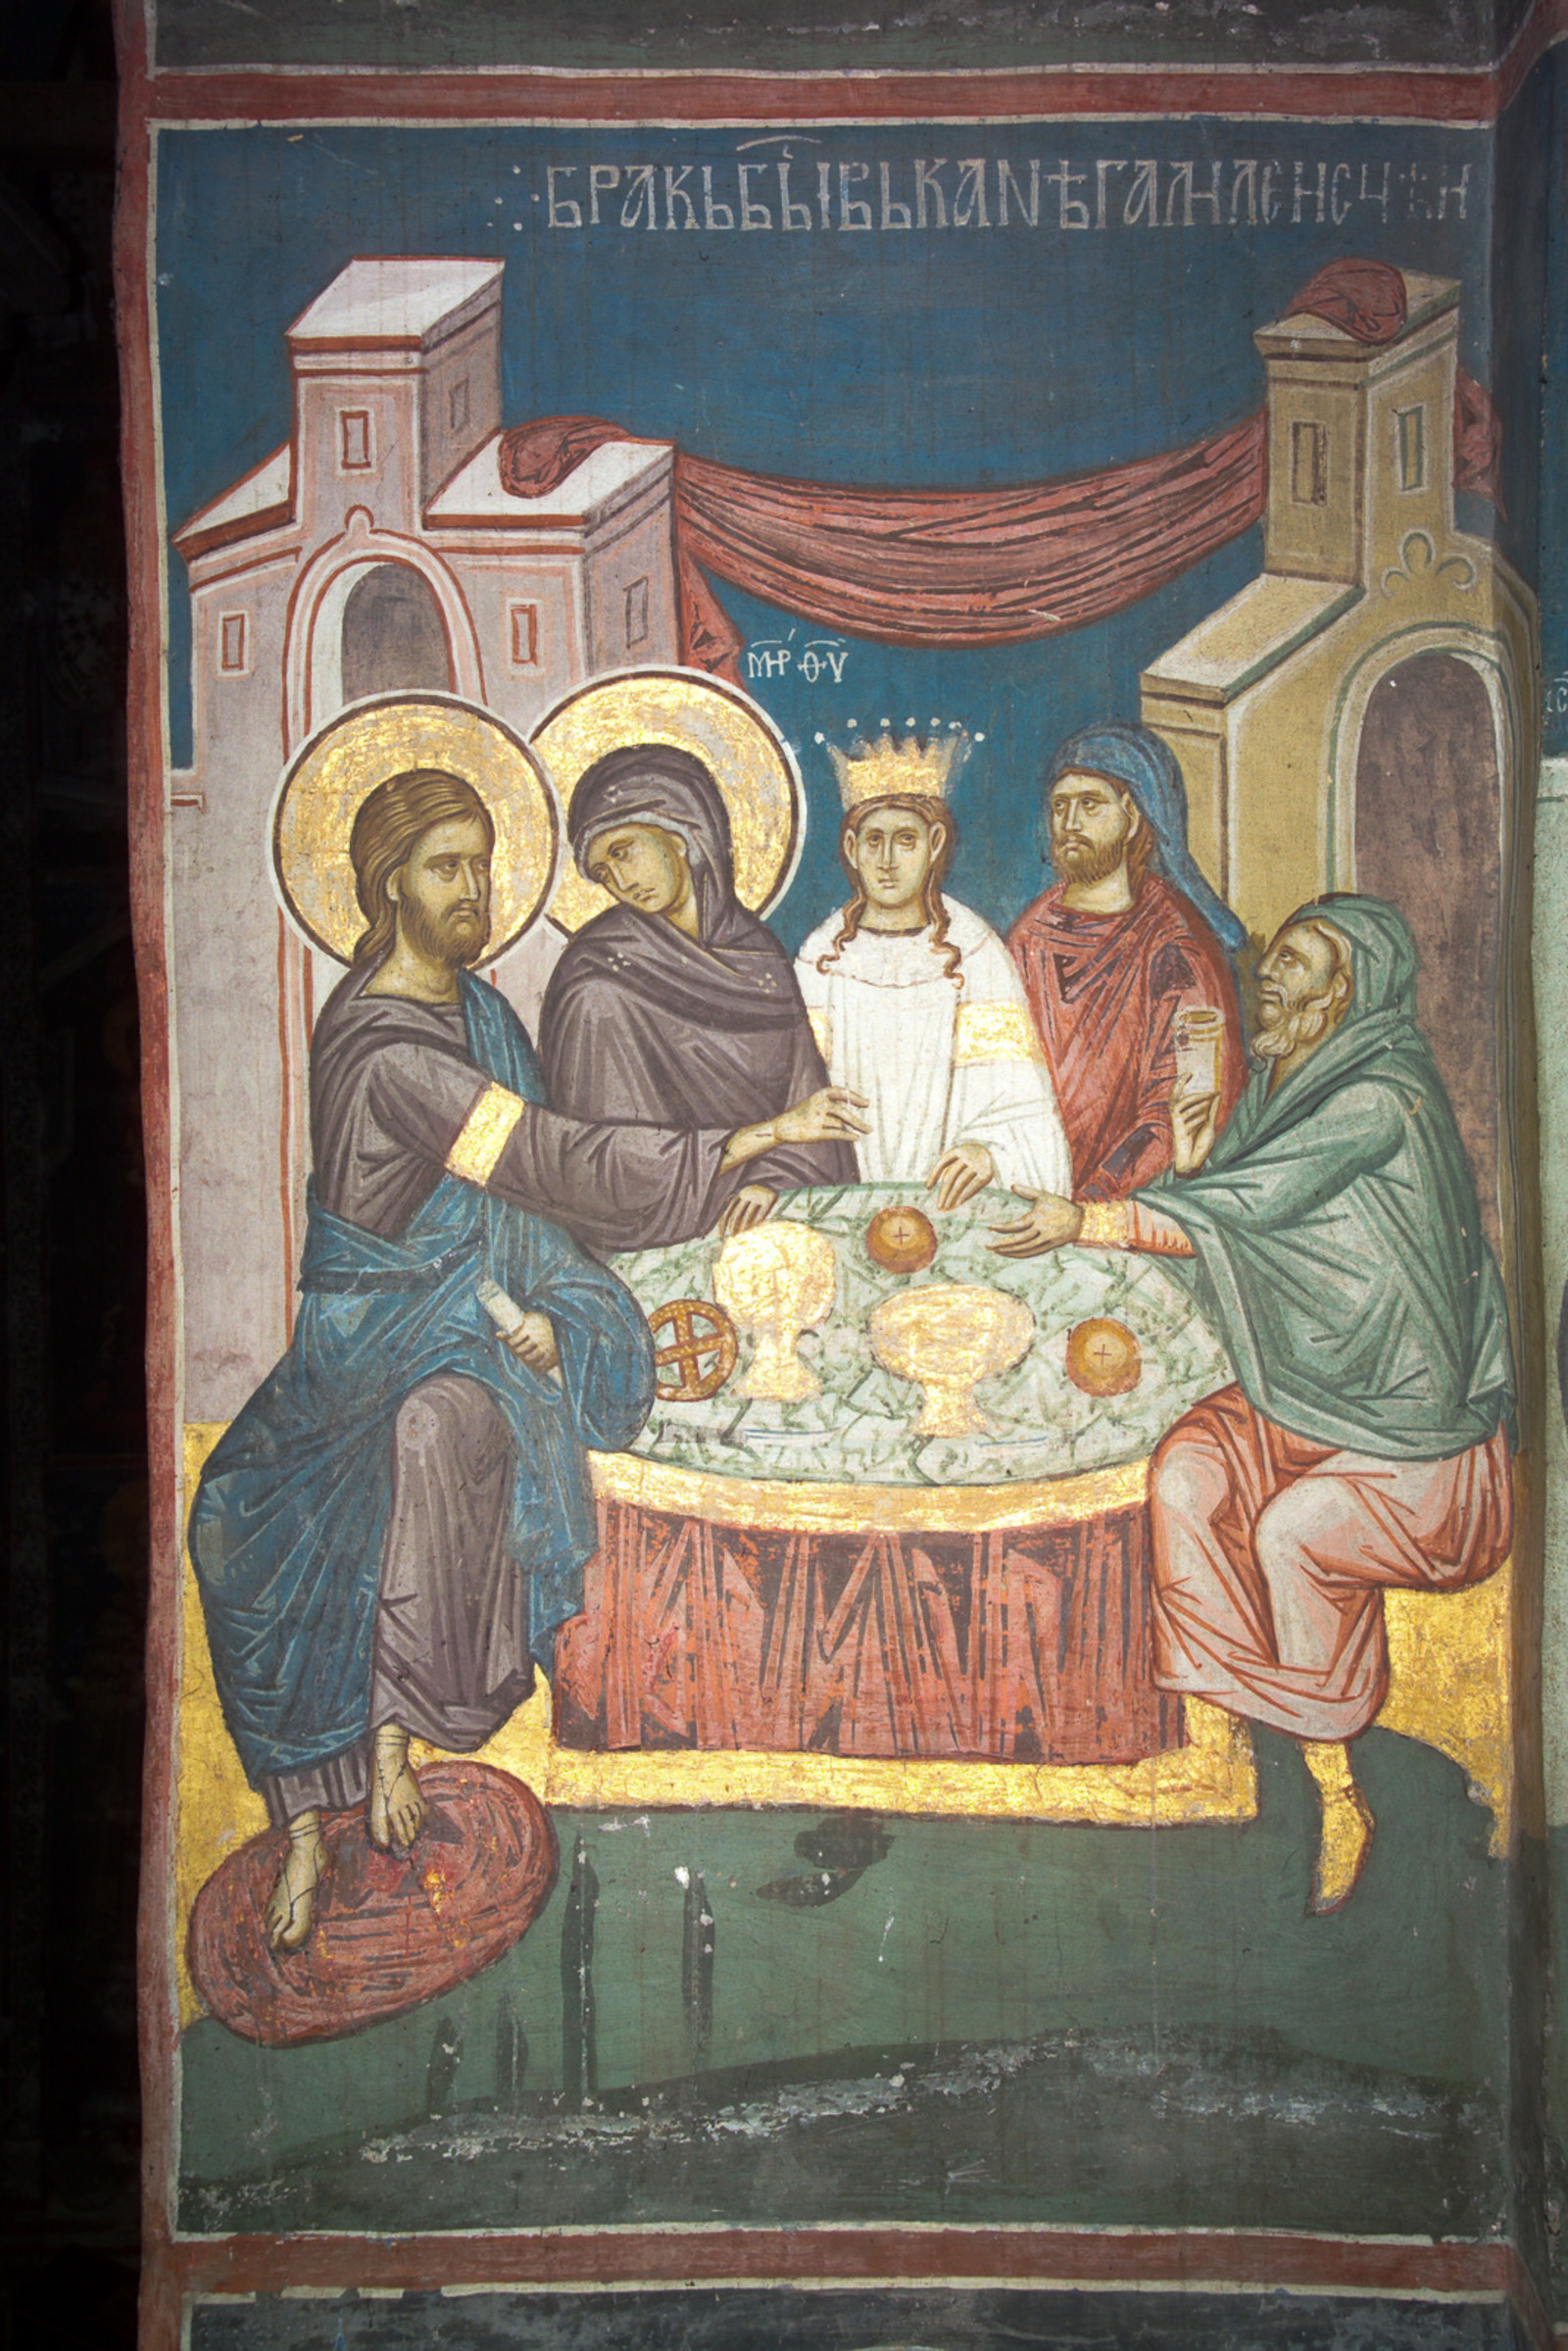 69 Marriage Feast in Cana